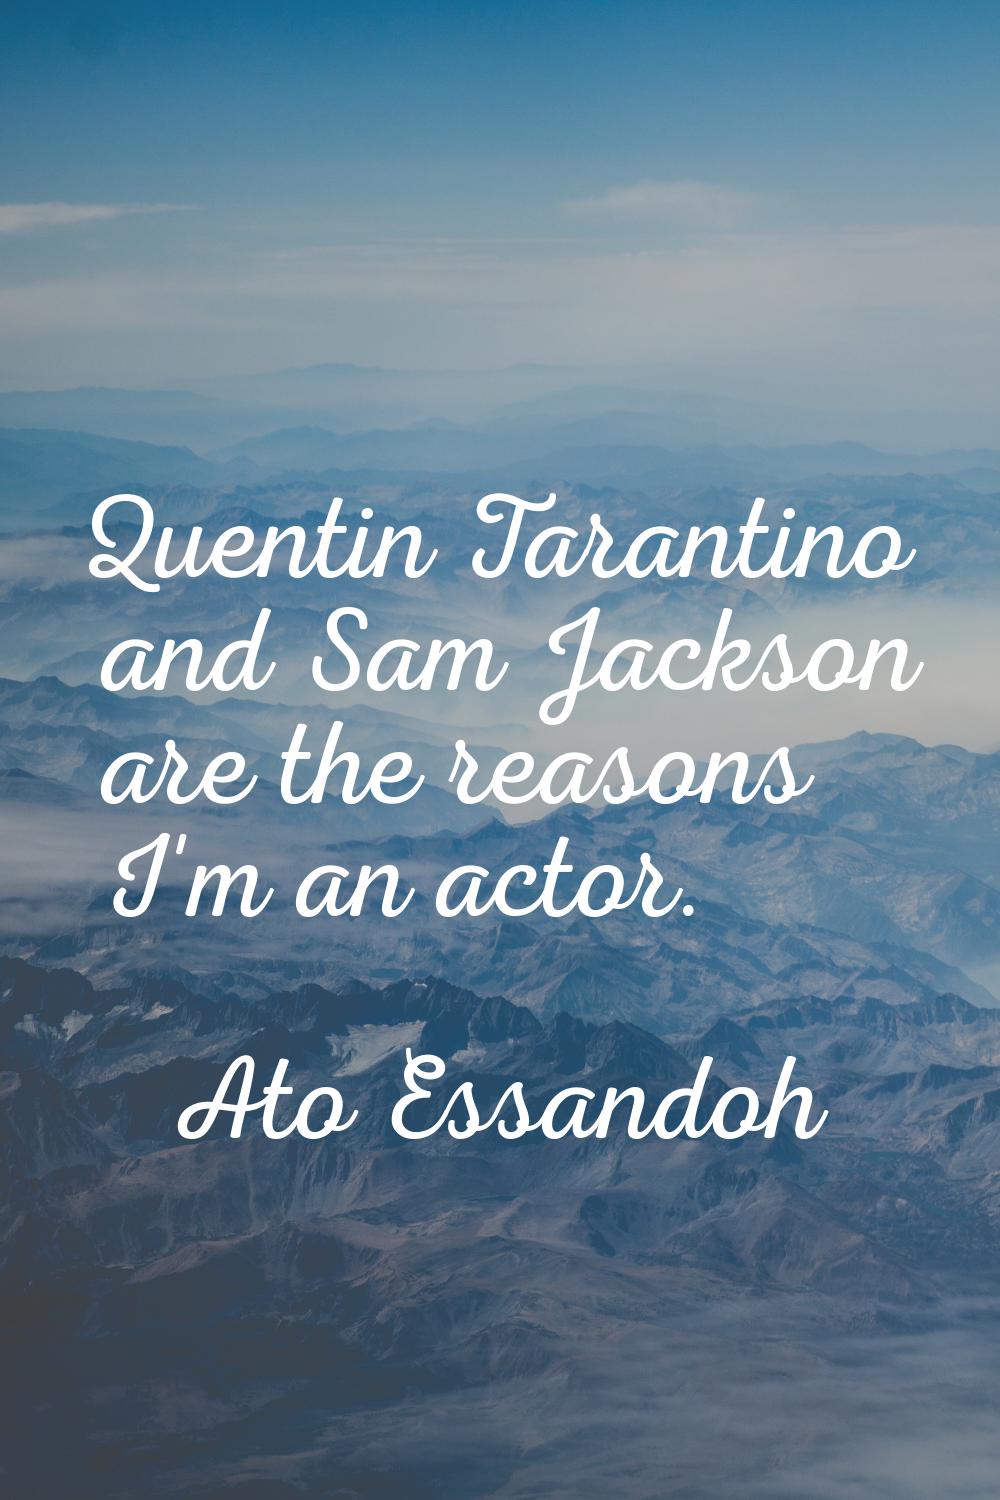 Quentin Tarantino and Sam Jackson are the reasons I'm an actor.